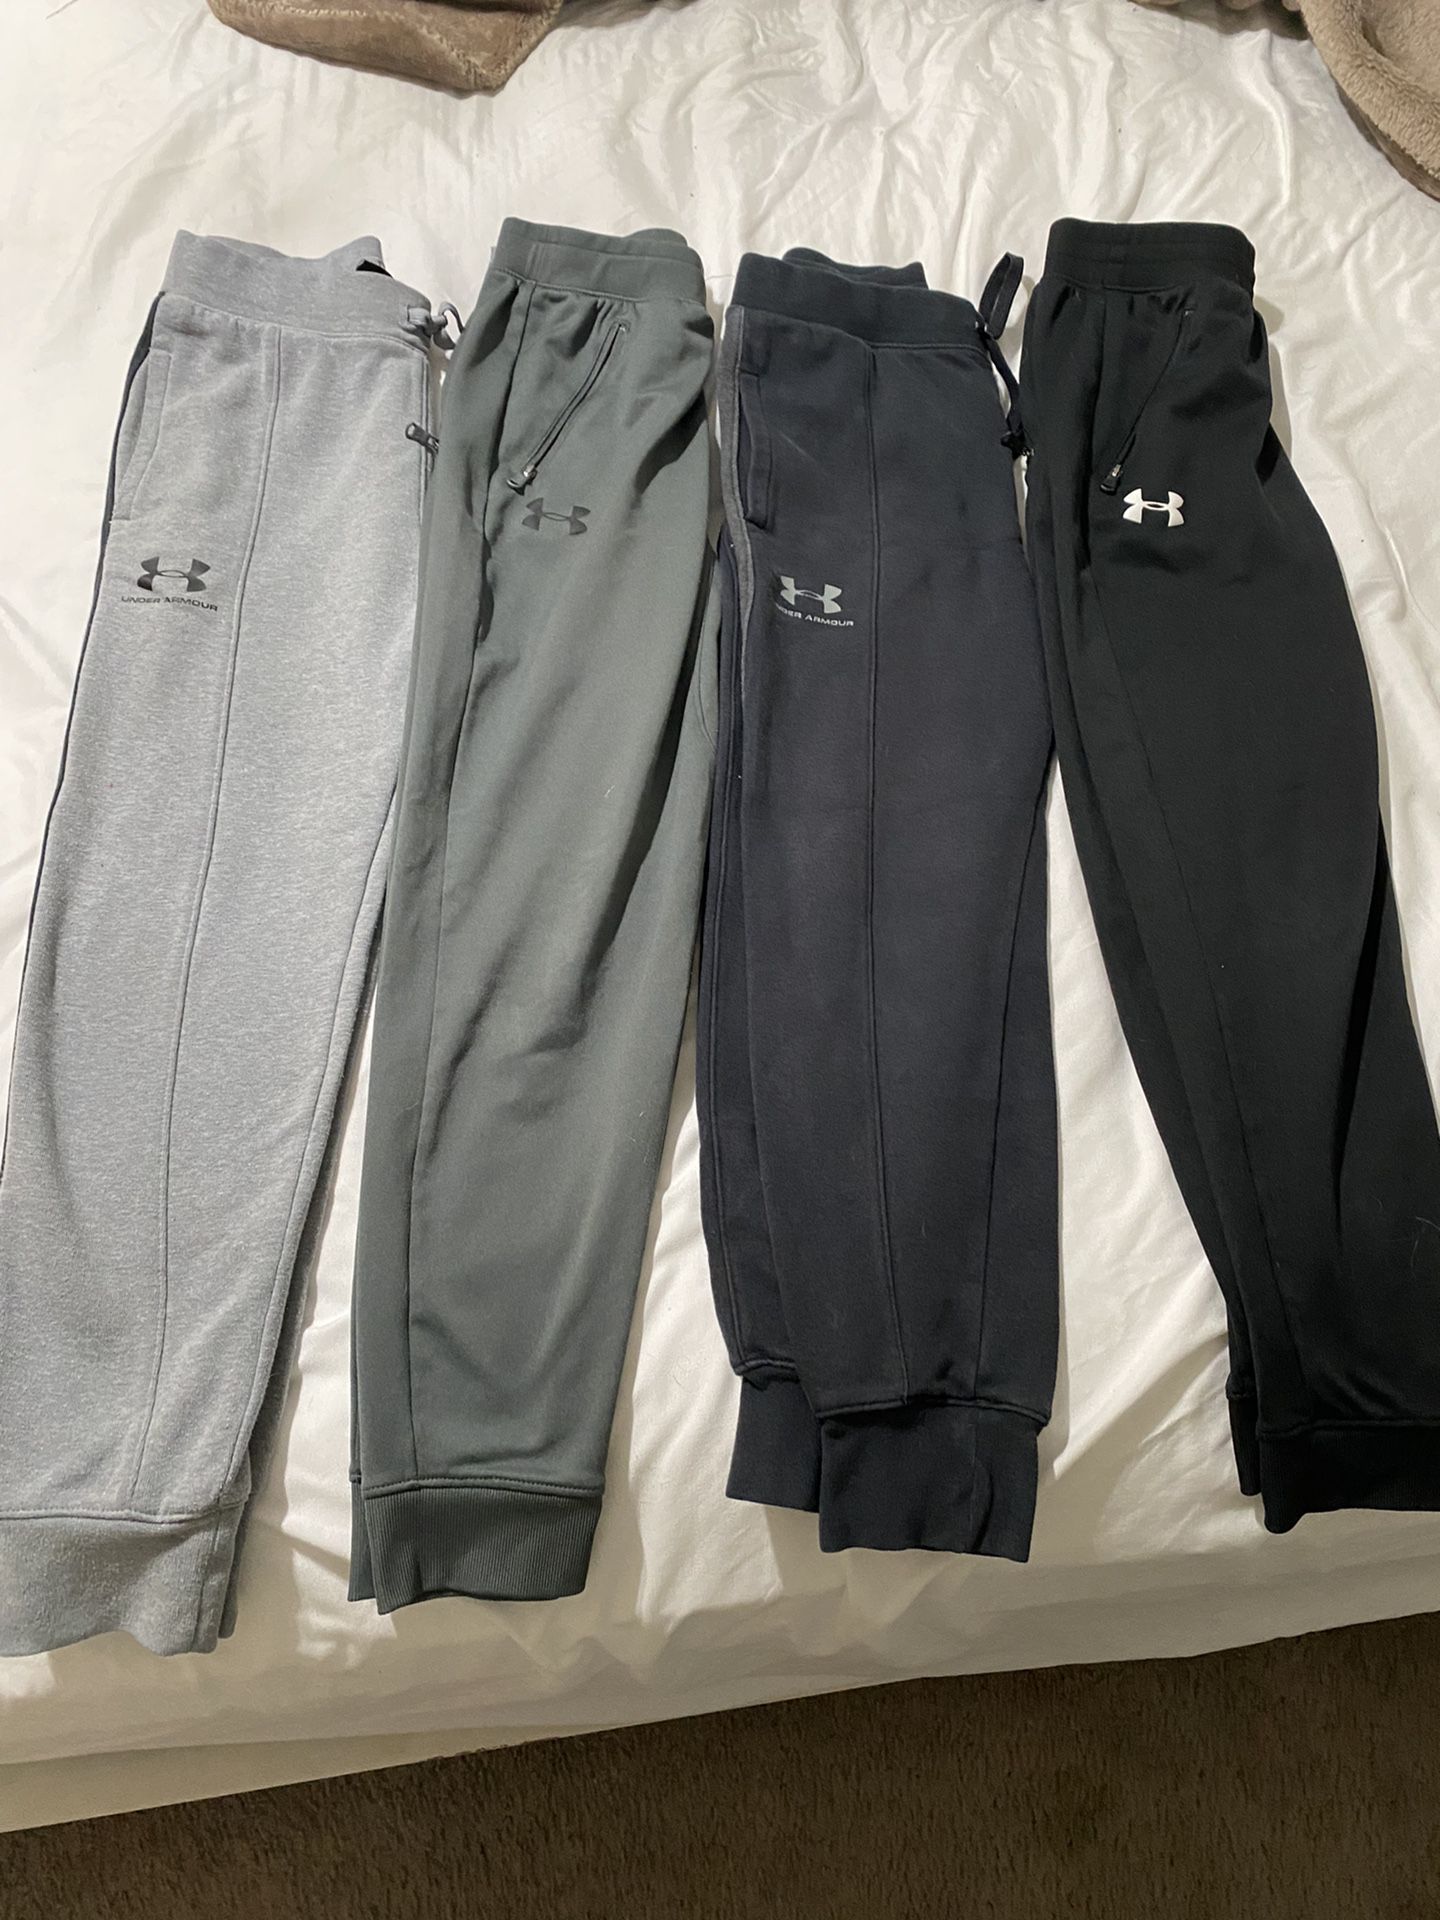 Youth Boy Under Armour Pants 